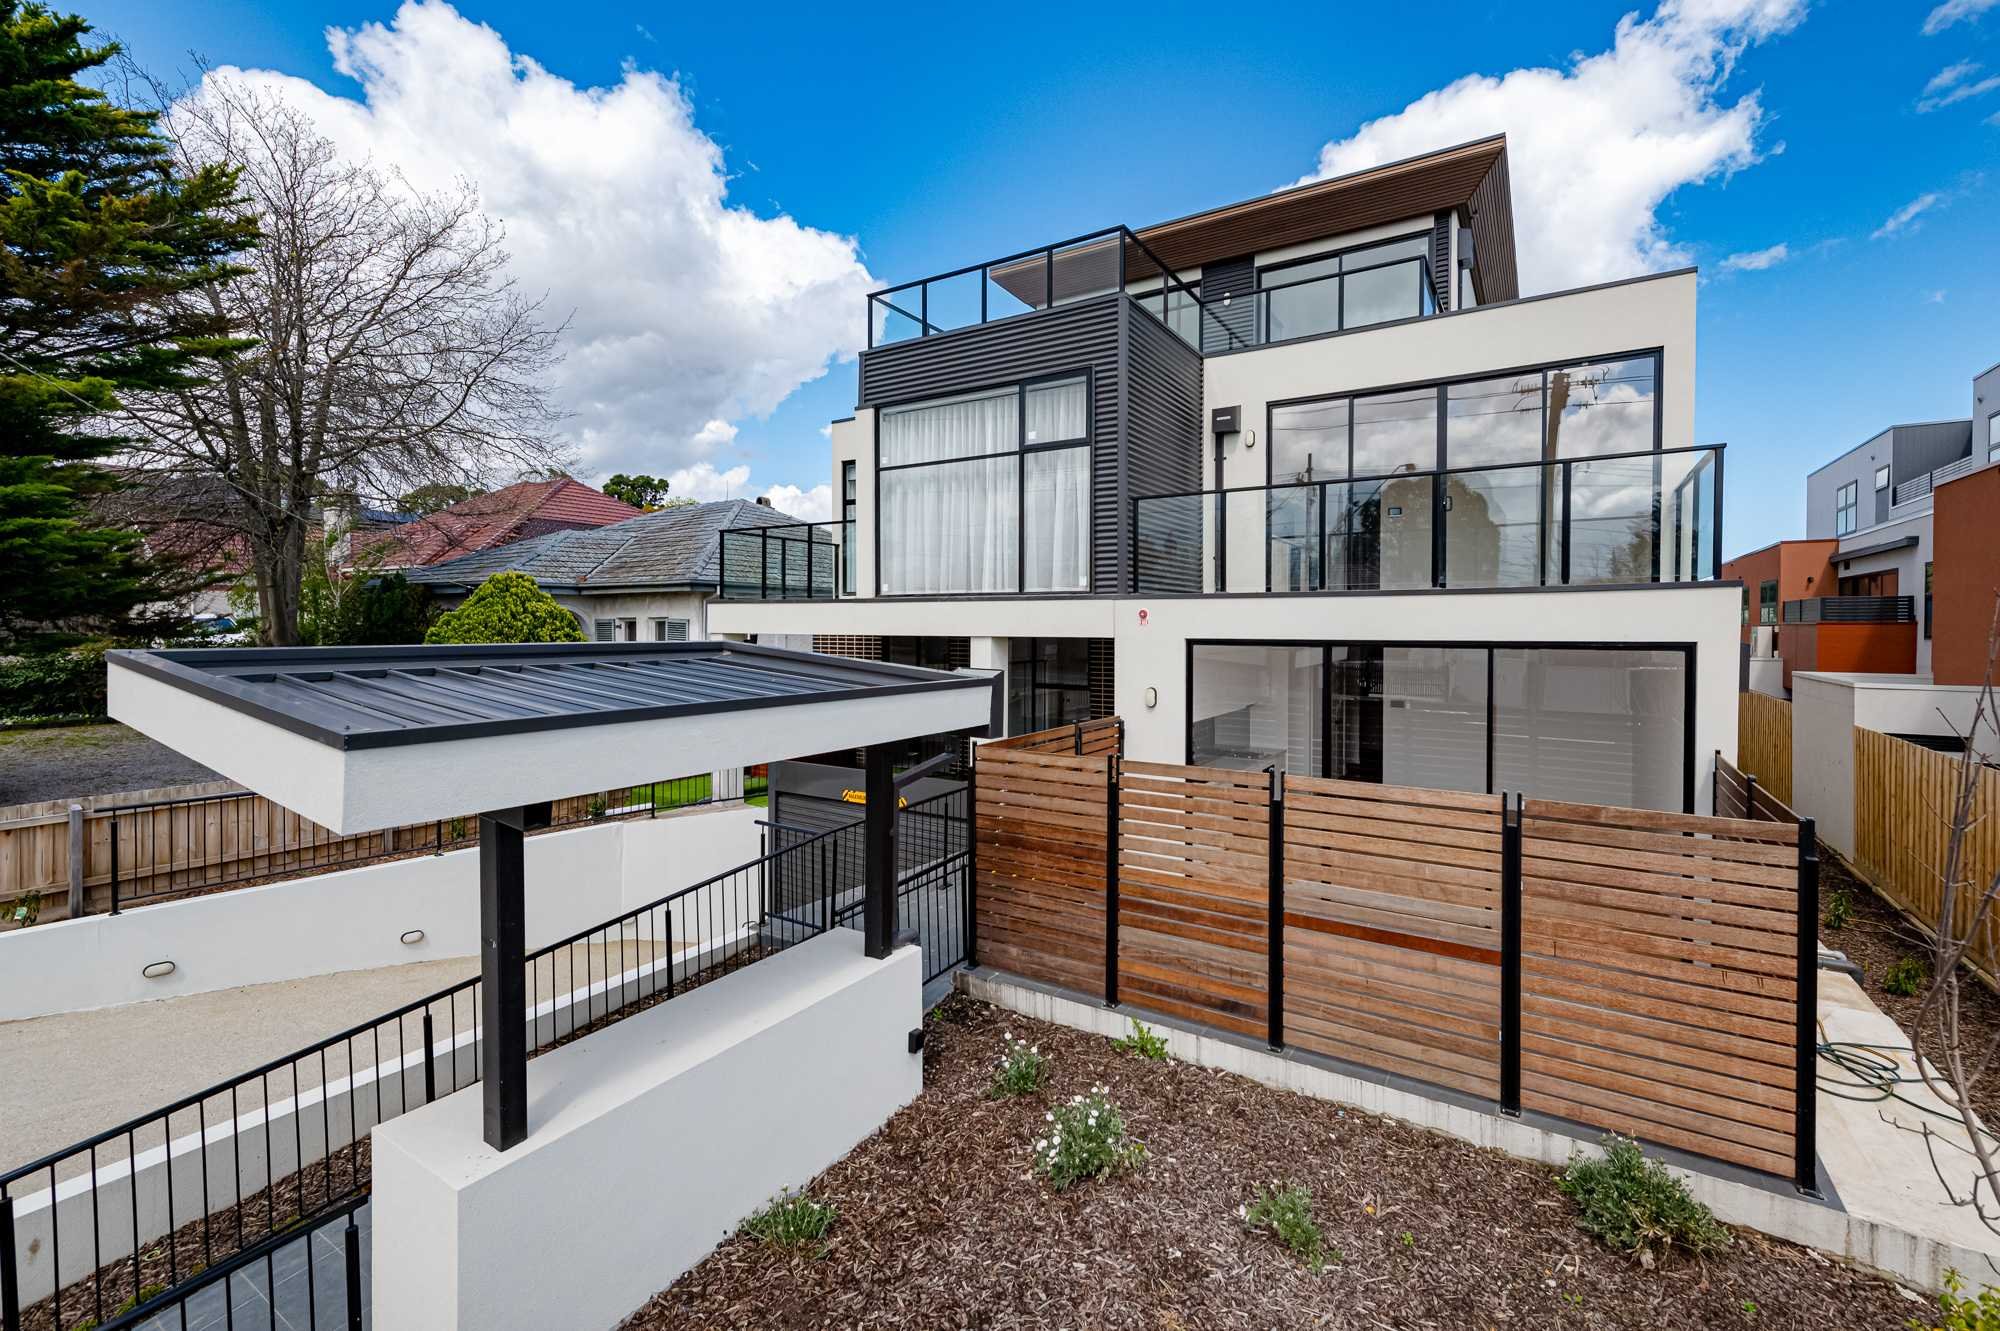 Camberwell - 1282 Toorak Road, Camberwell, VIC 3124 - Townly - 12.jpg